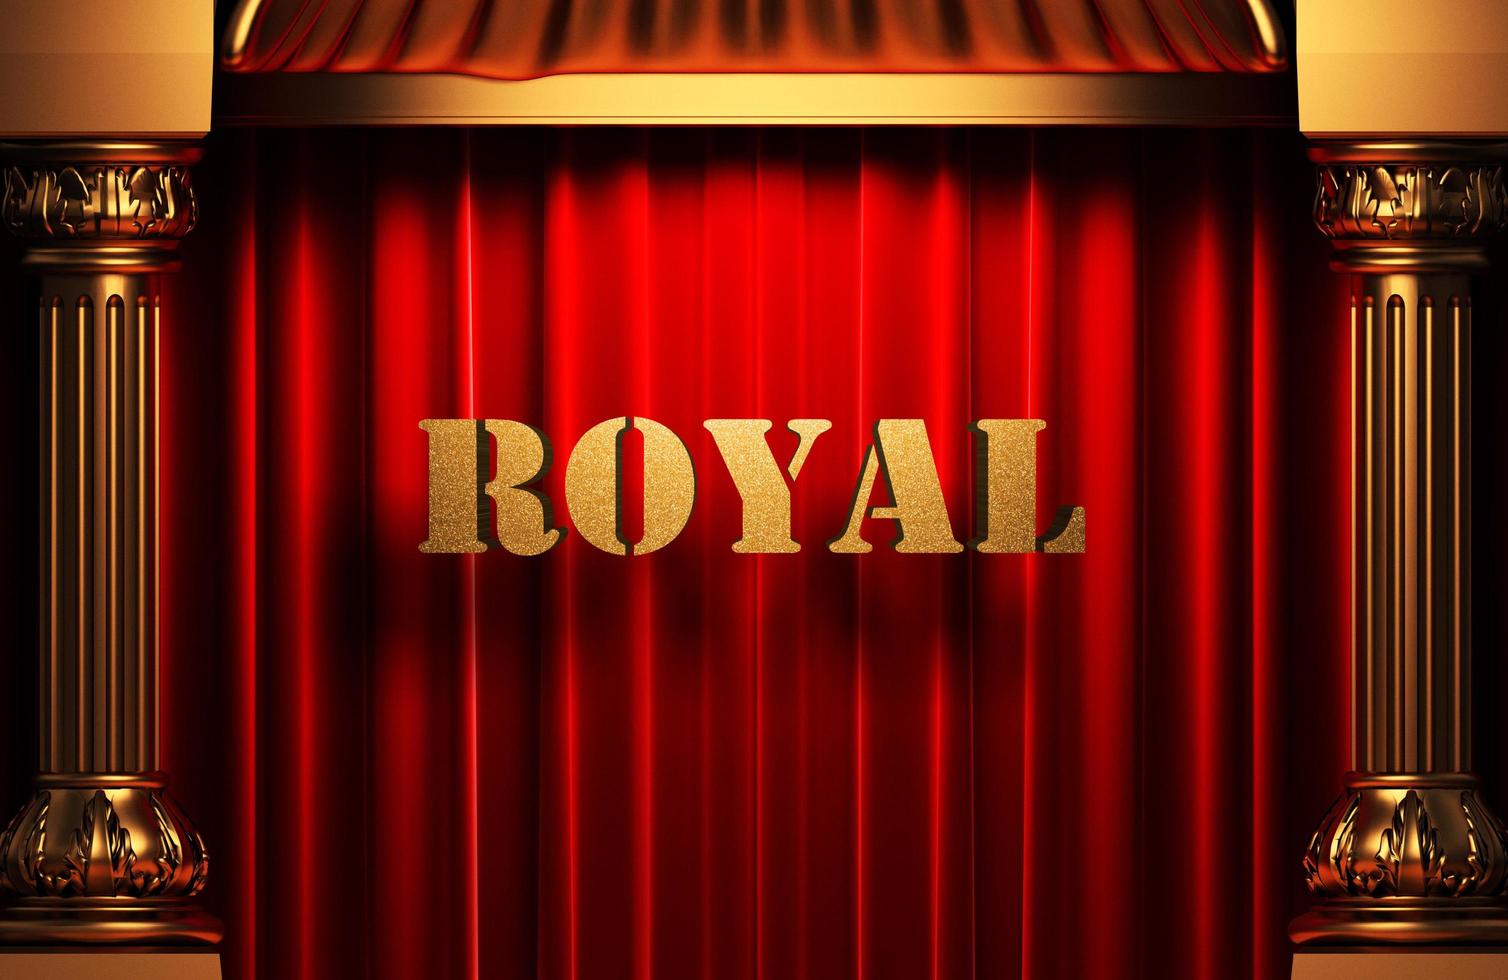 royal golden word on red curtain photo